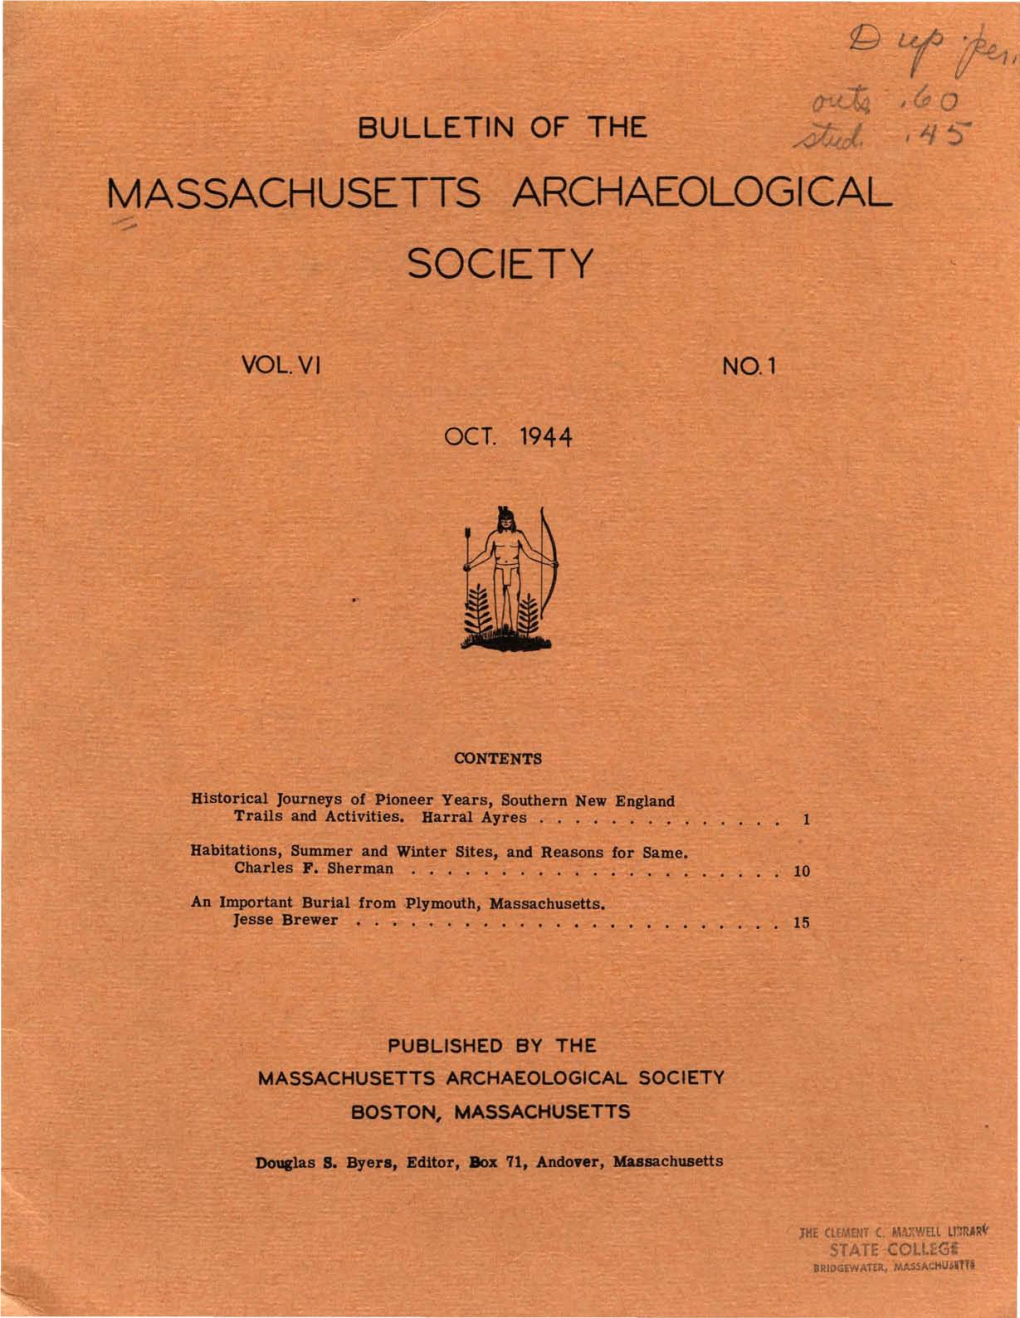 Bulletin of the Massachusetts Archaeological Society, Vol. 6, No